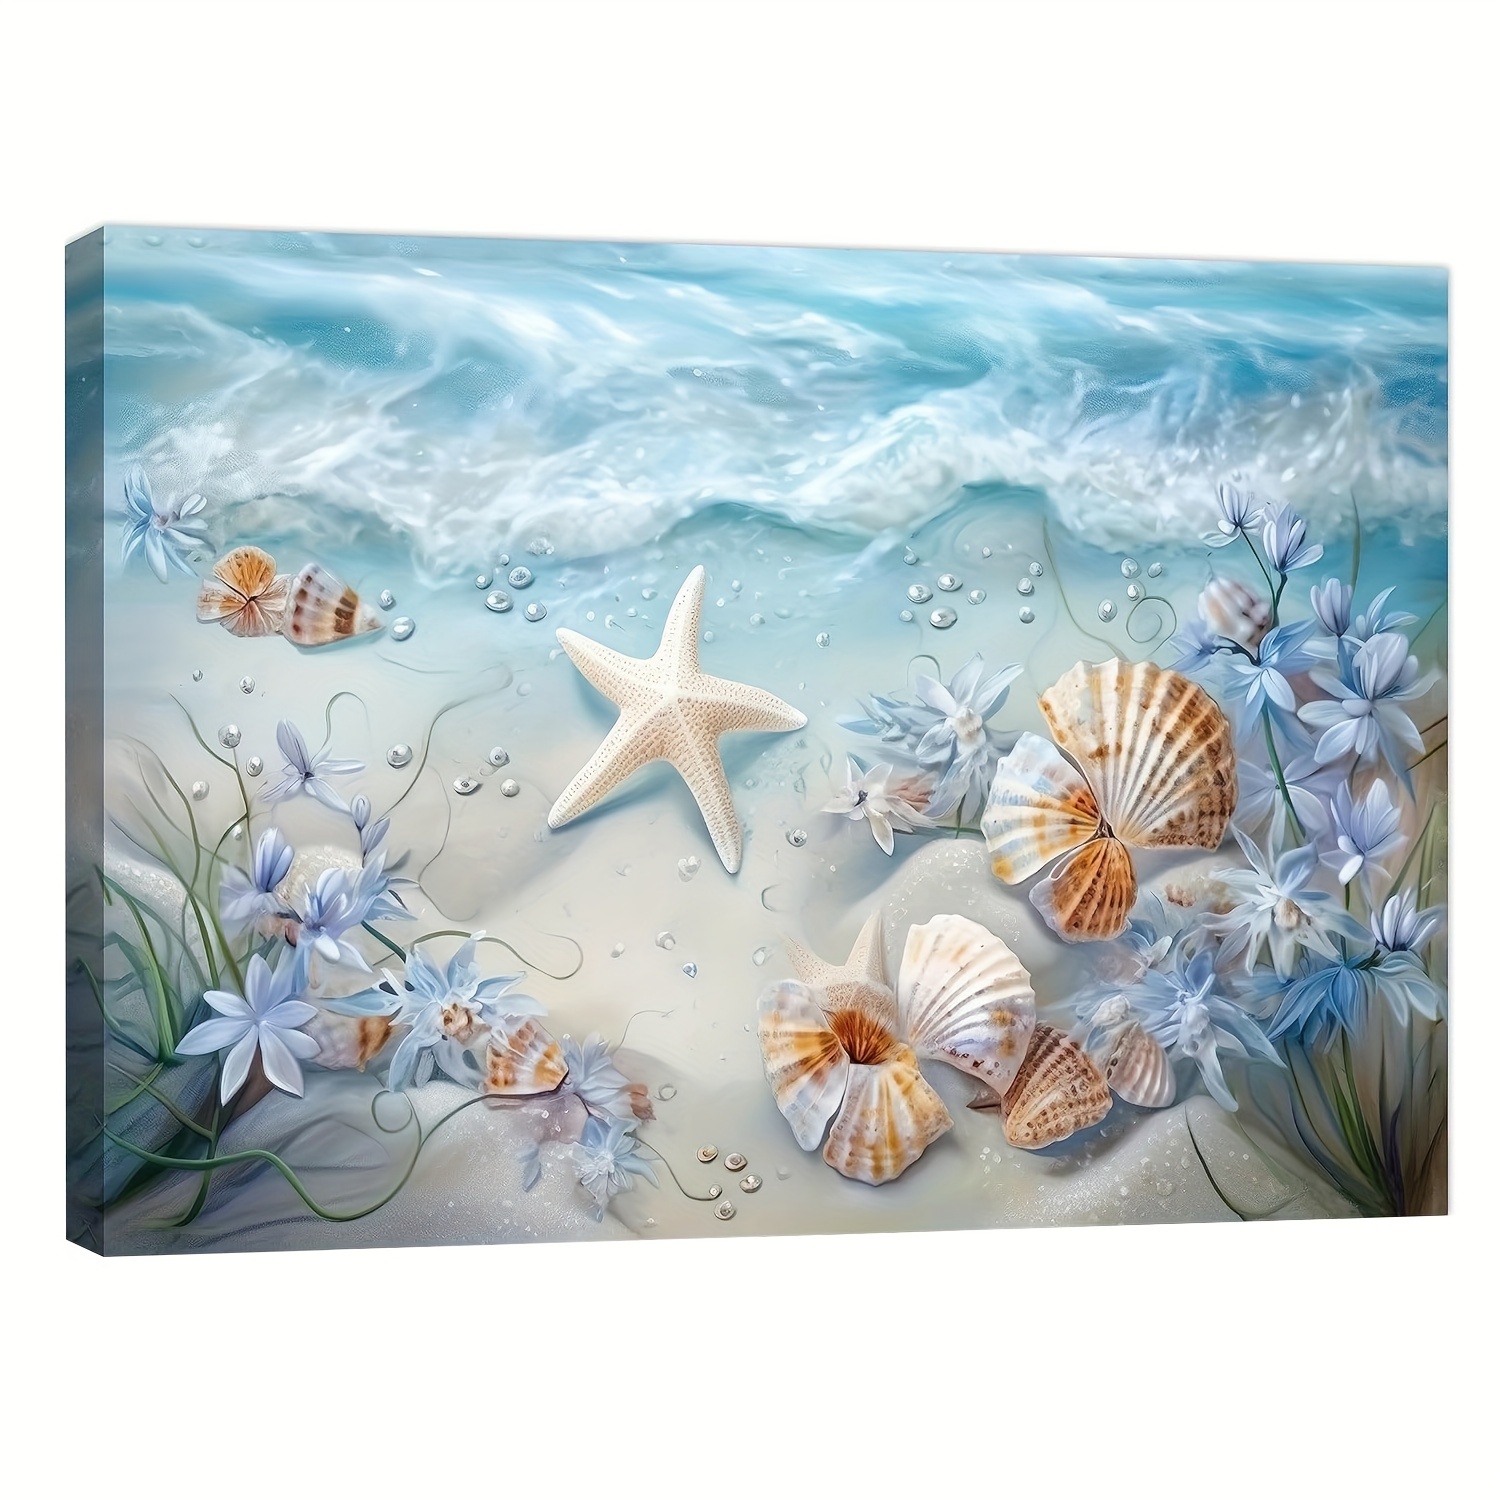 

1pc, Beach Shell Bathroom Wall Art Coast Flower Pictures Wall Decoration Flowers Starfish Canvas Print Modern Home Decoration Artwork Bedroom Living Room Office 12 X 16 Inch Frameless